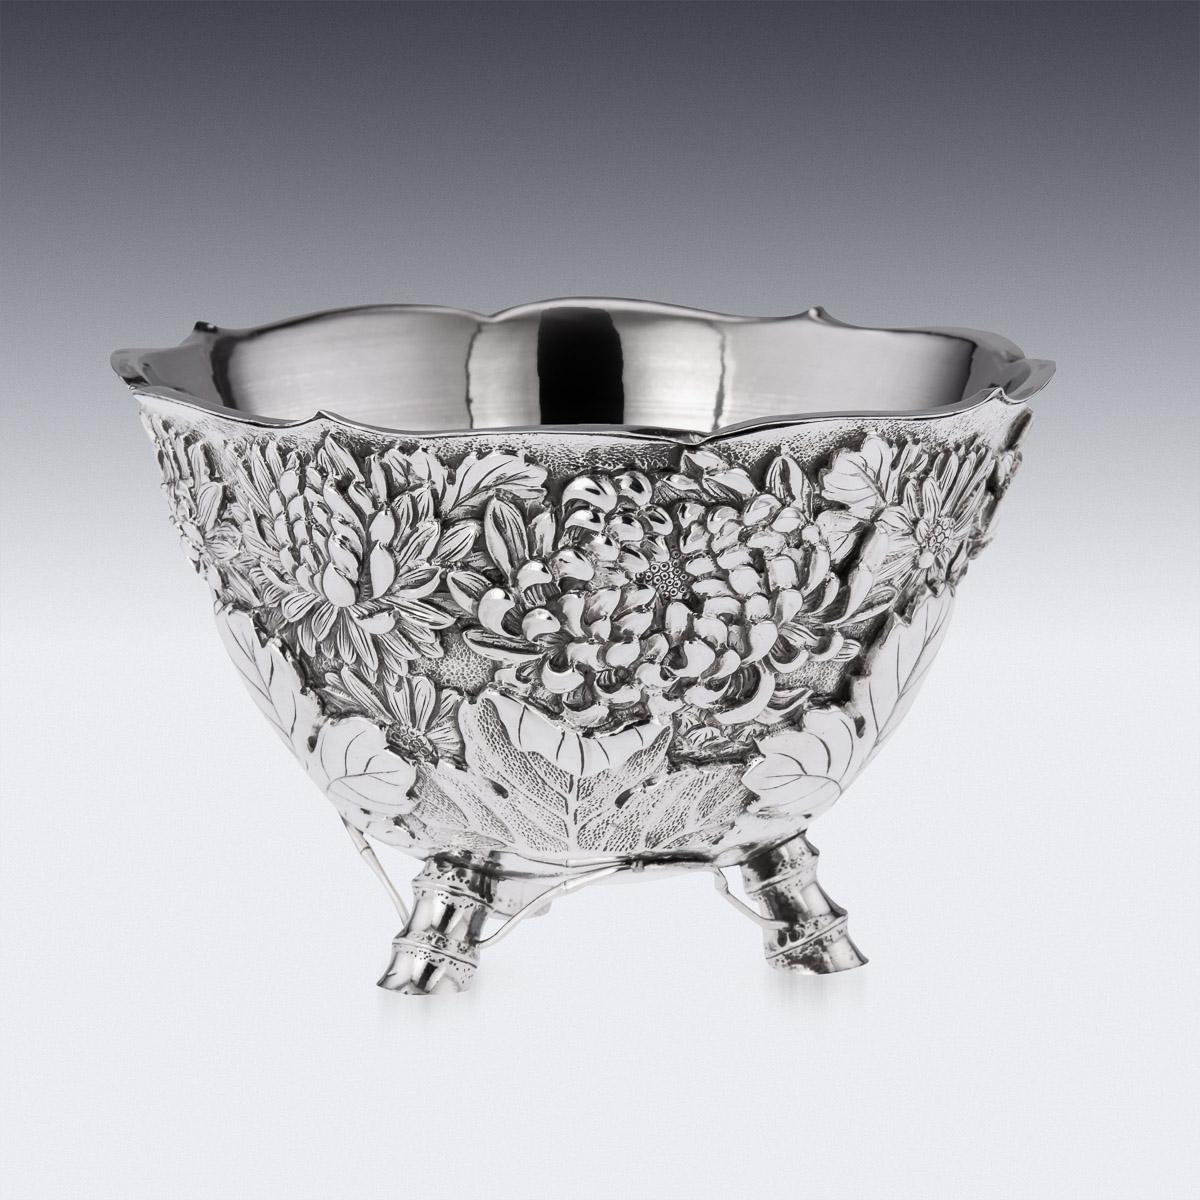 20th century Japanese Meiji period silver bowl, double walled, densely chased and embossed with blossoming irises on matted hand hammered ground, shaped floral rim and standing on bamboo shaped feet.
Hallmarked with the “jungin”, meaning “pure